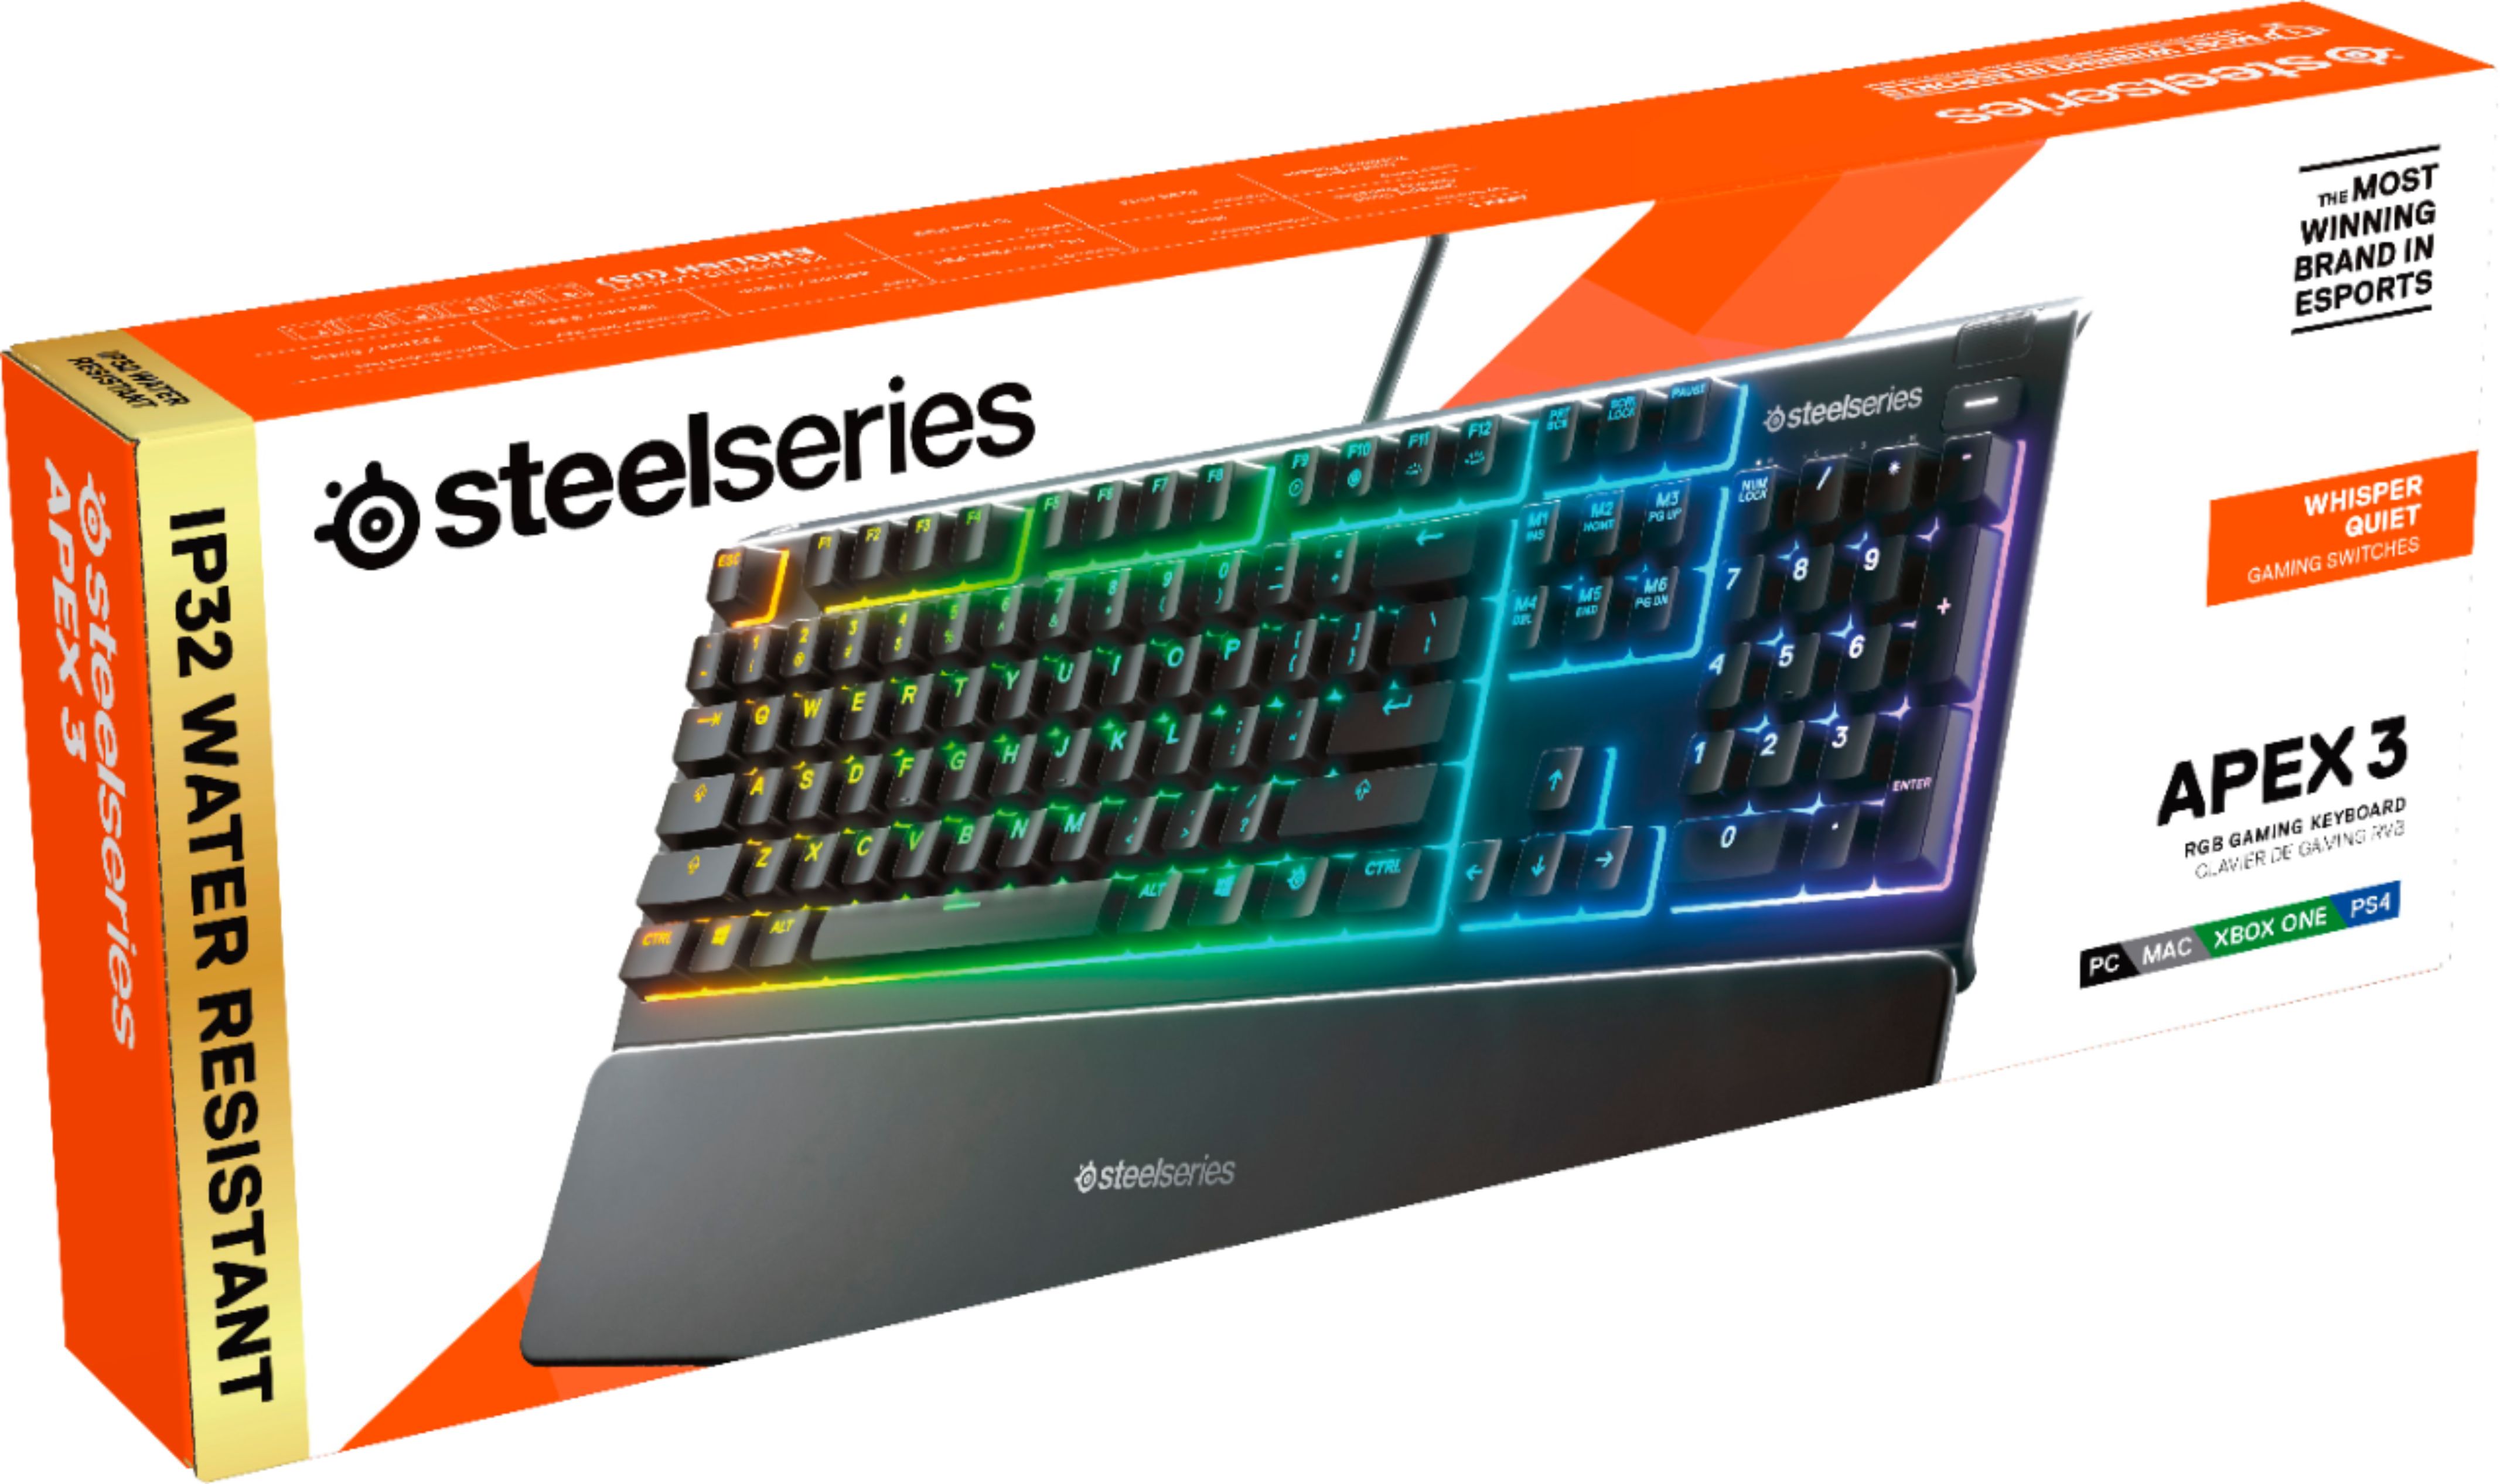 Membrane Whisper Full Buy Backlighting Wired Keyboard 10 Switch zone - Black Best SteelSeries RGB 3 Quiet Apex Gaming with Size 64795